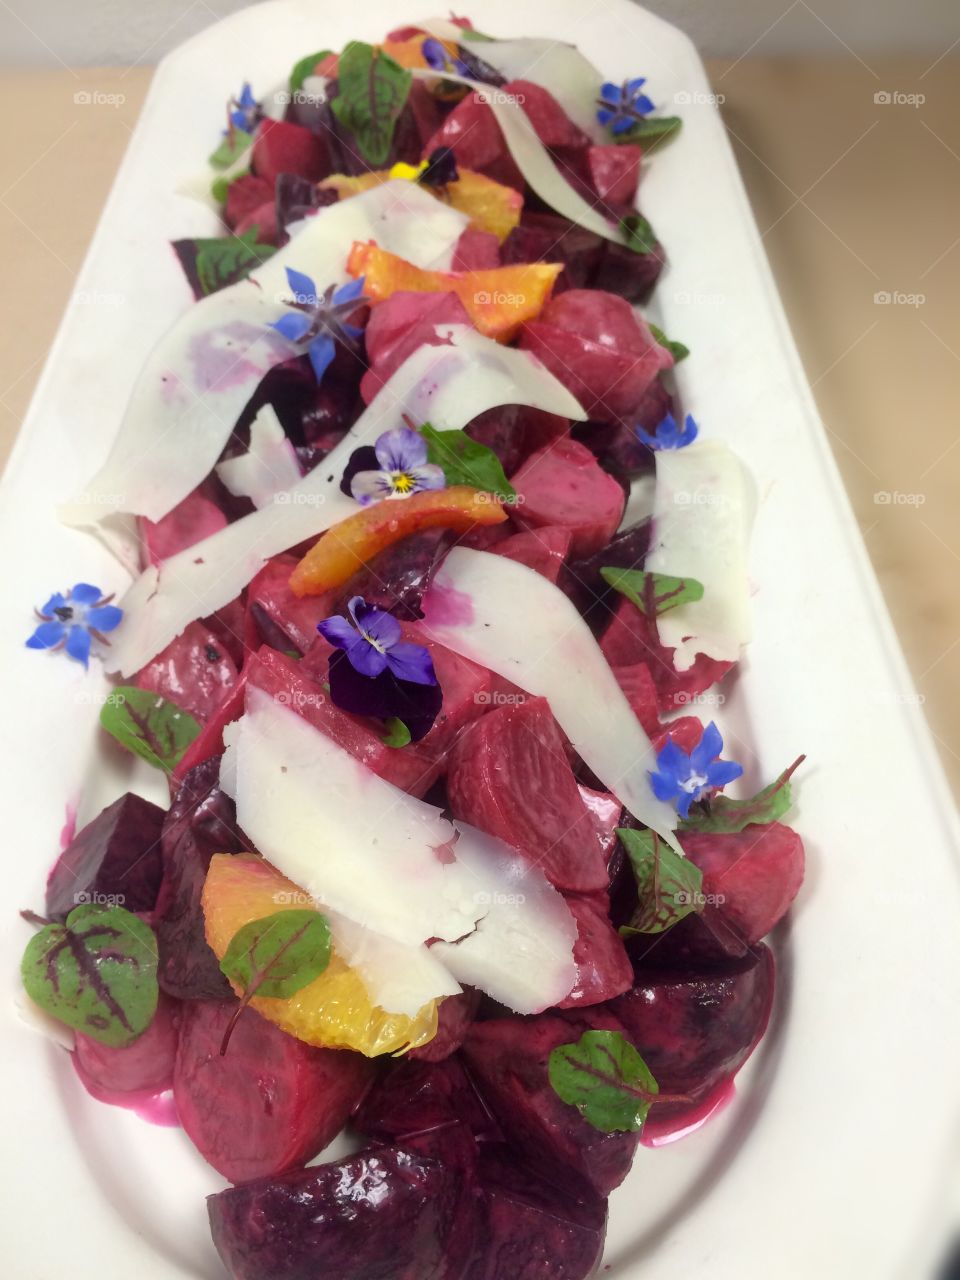 Beet salad tossed in citrus vinegrette with orange slices and shaved asiago cheese. Garnished with sorrel and flowers.
